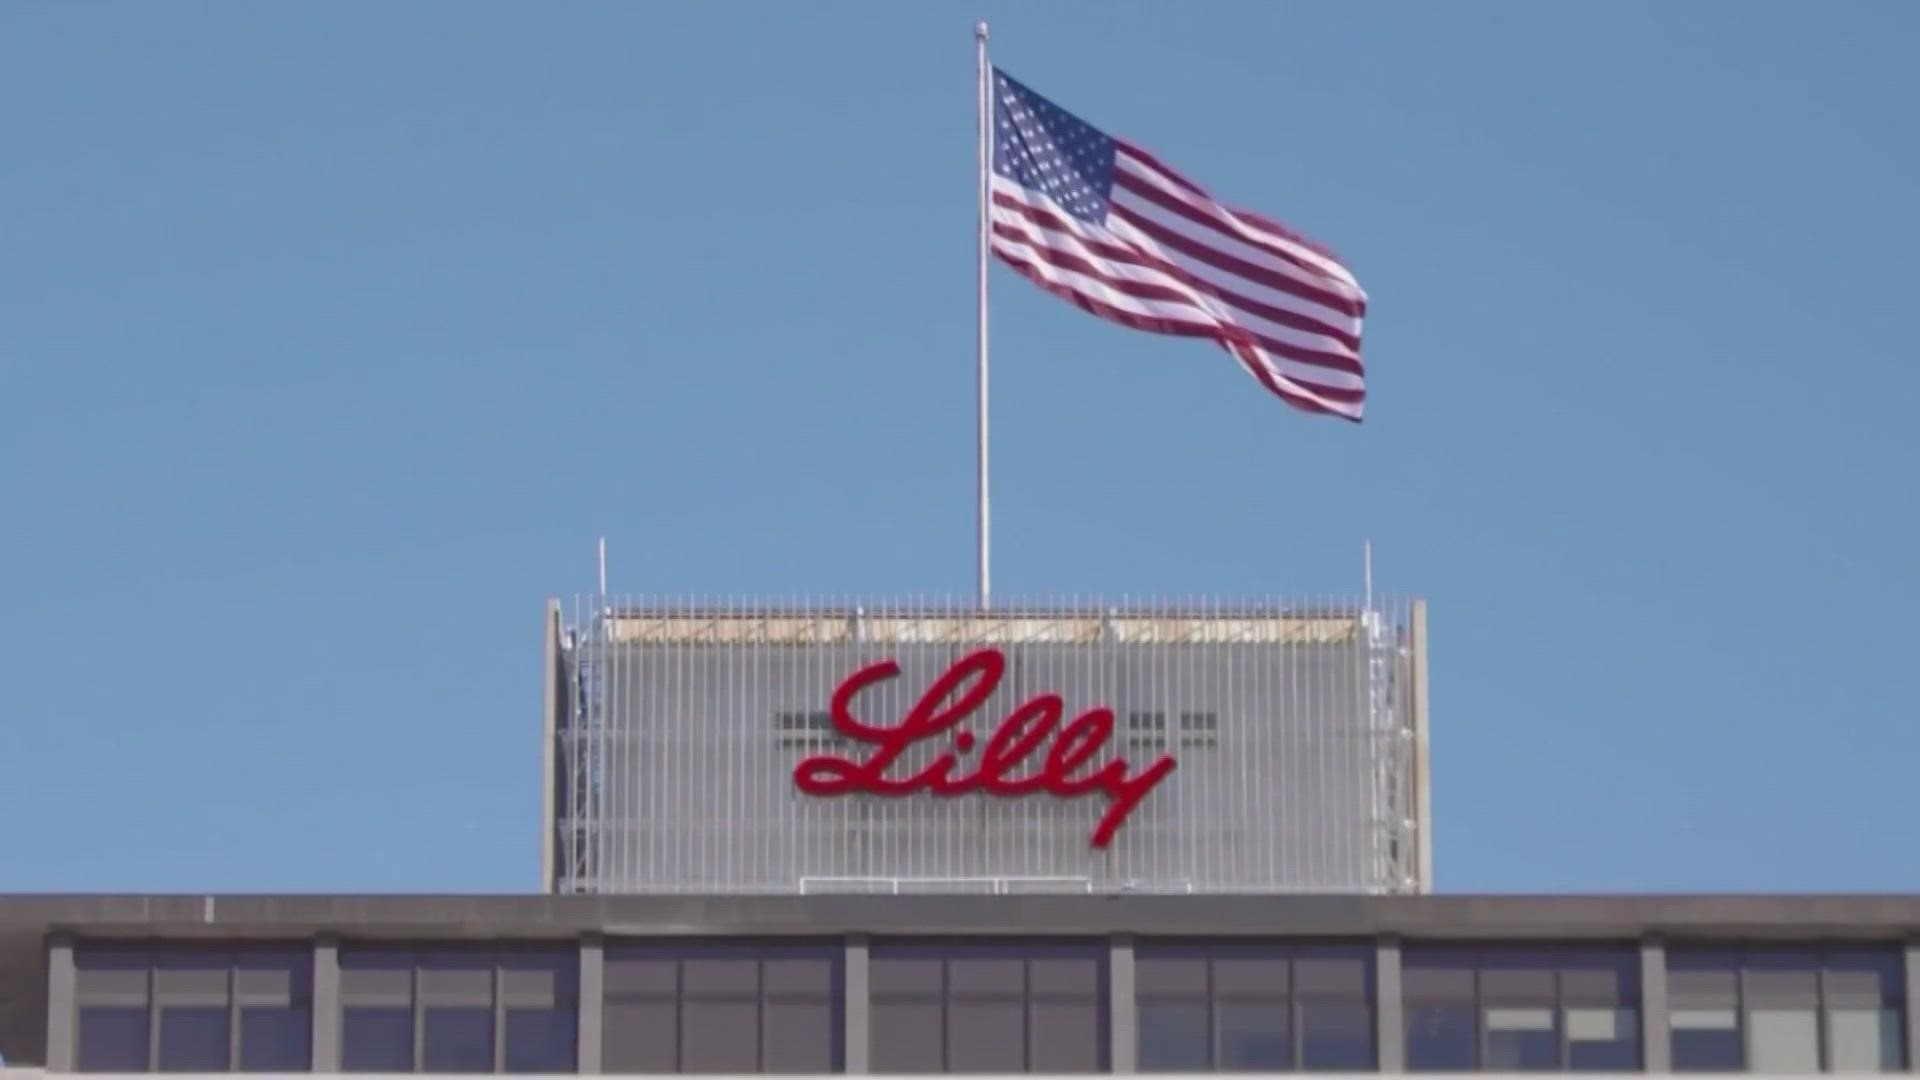 People with diabetes say this change from Indy-based Eli Lilly allows them to get much needed savings on life-saving medicine.